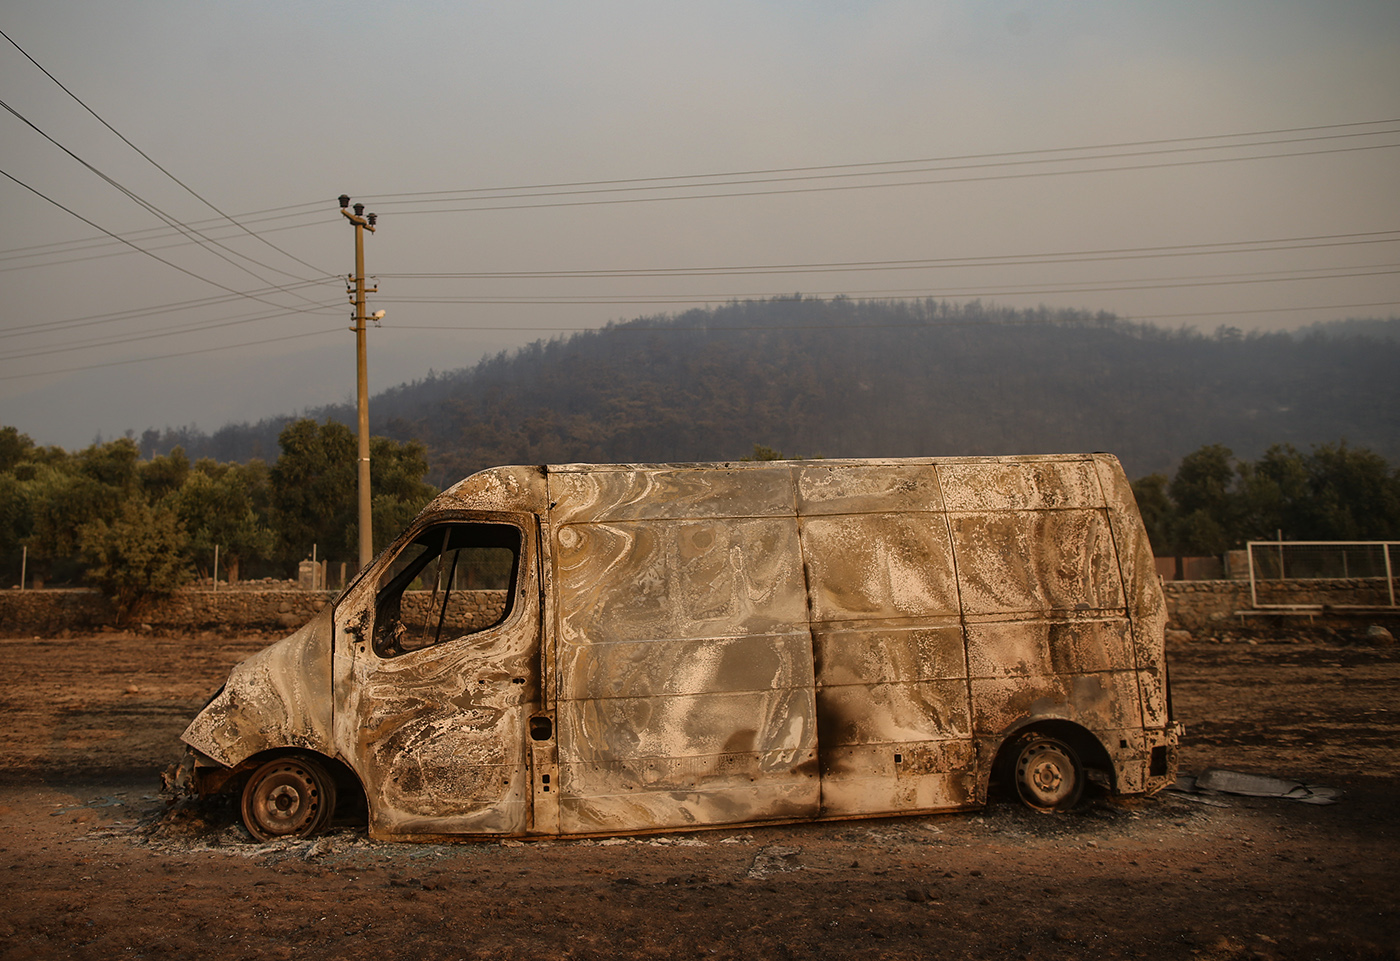 A burned car after a wildfire swept through at the Cokertme village of Milas district of Mugla, Turkey, 02 August 2021. Turkish Health minister Fahrettin Koca confirmed that eight people have lost their lives due to the wildfires raging in Turkey’s Mediterranean towns.